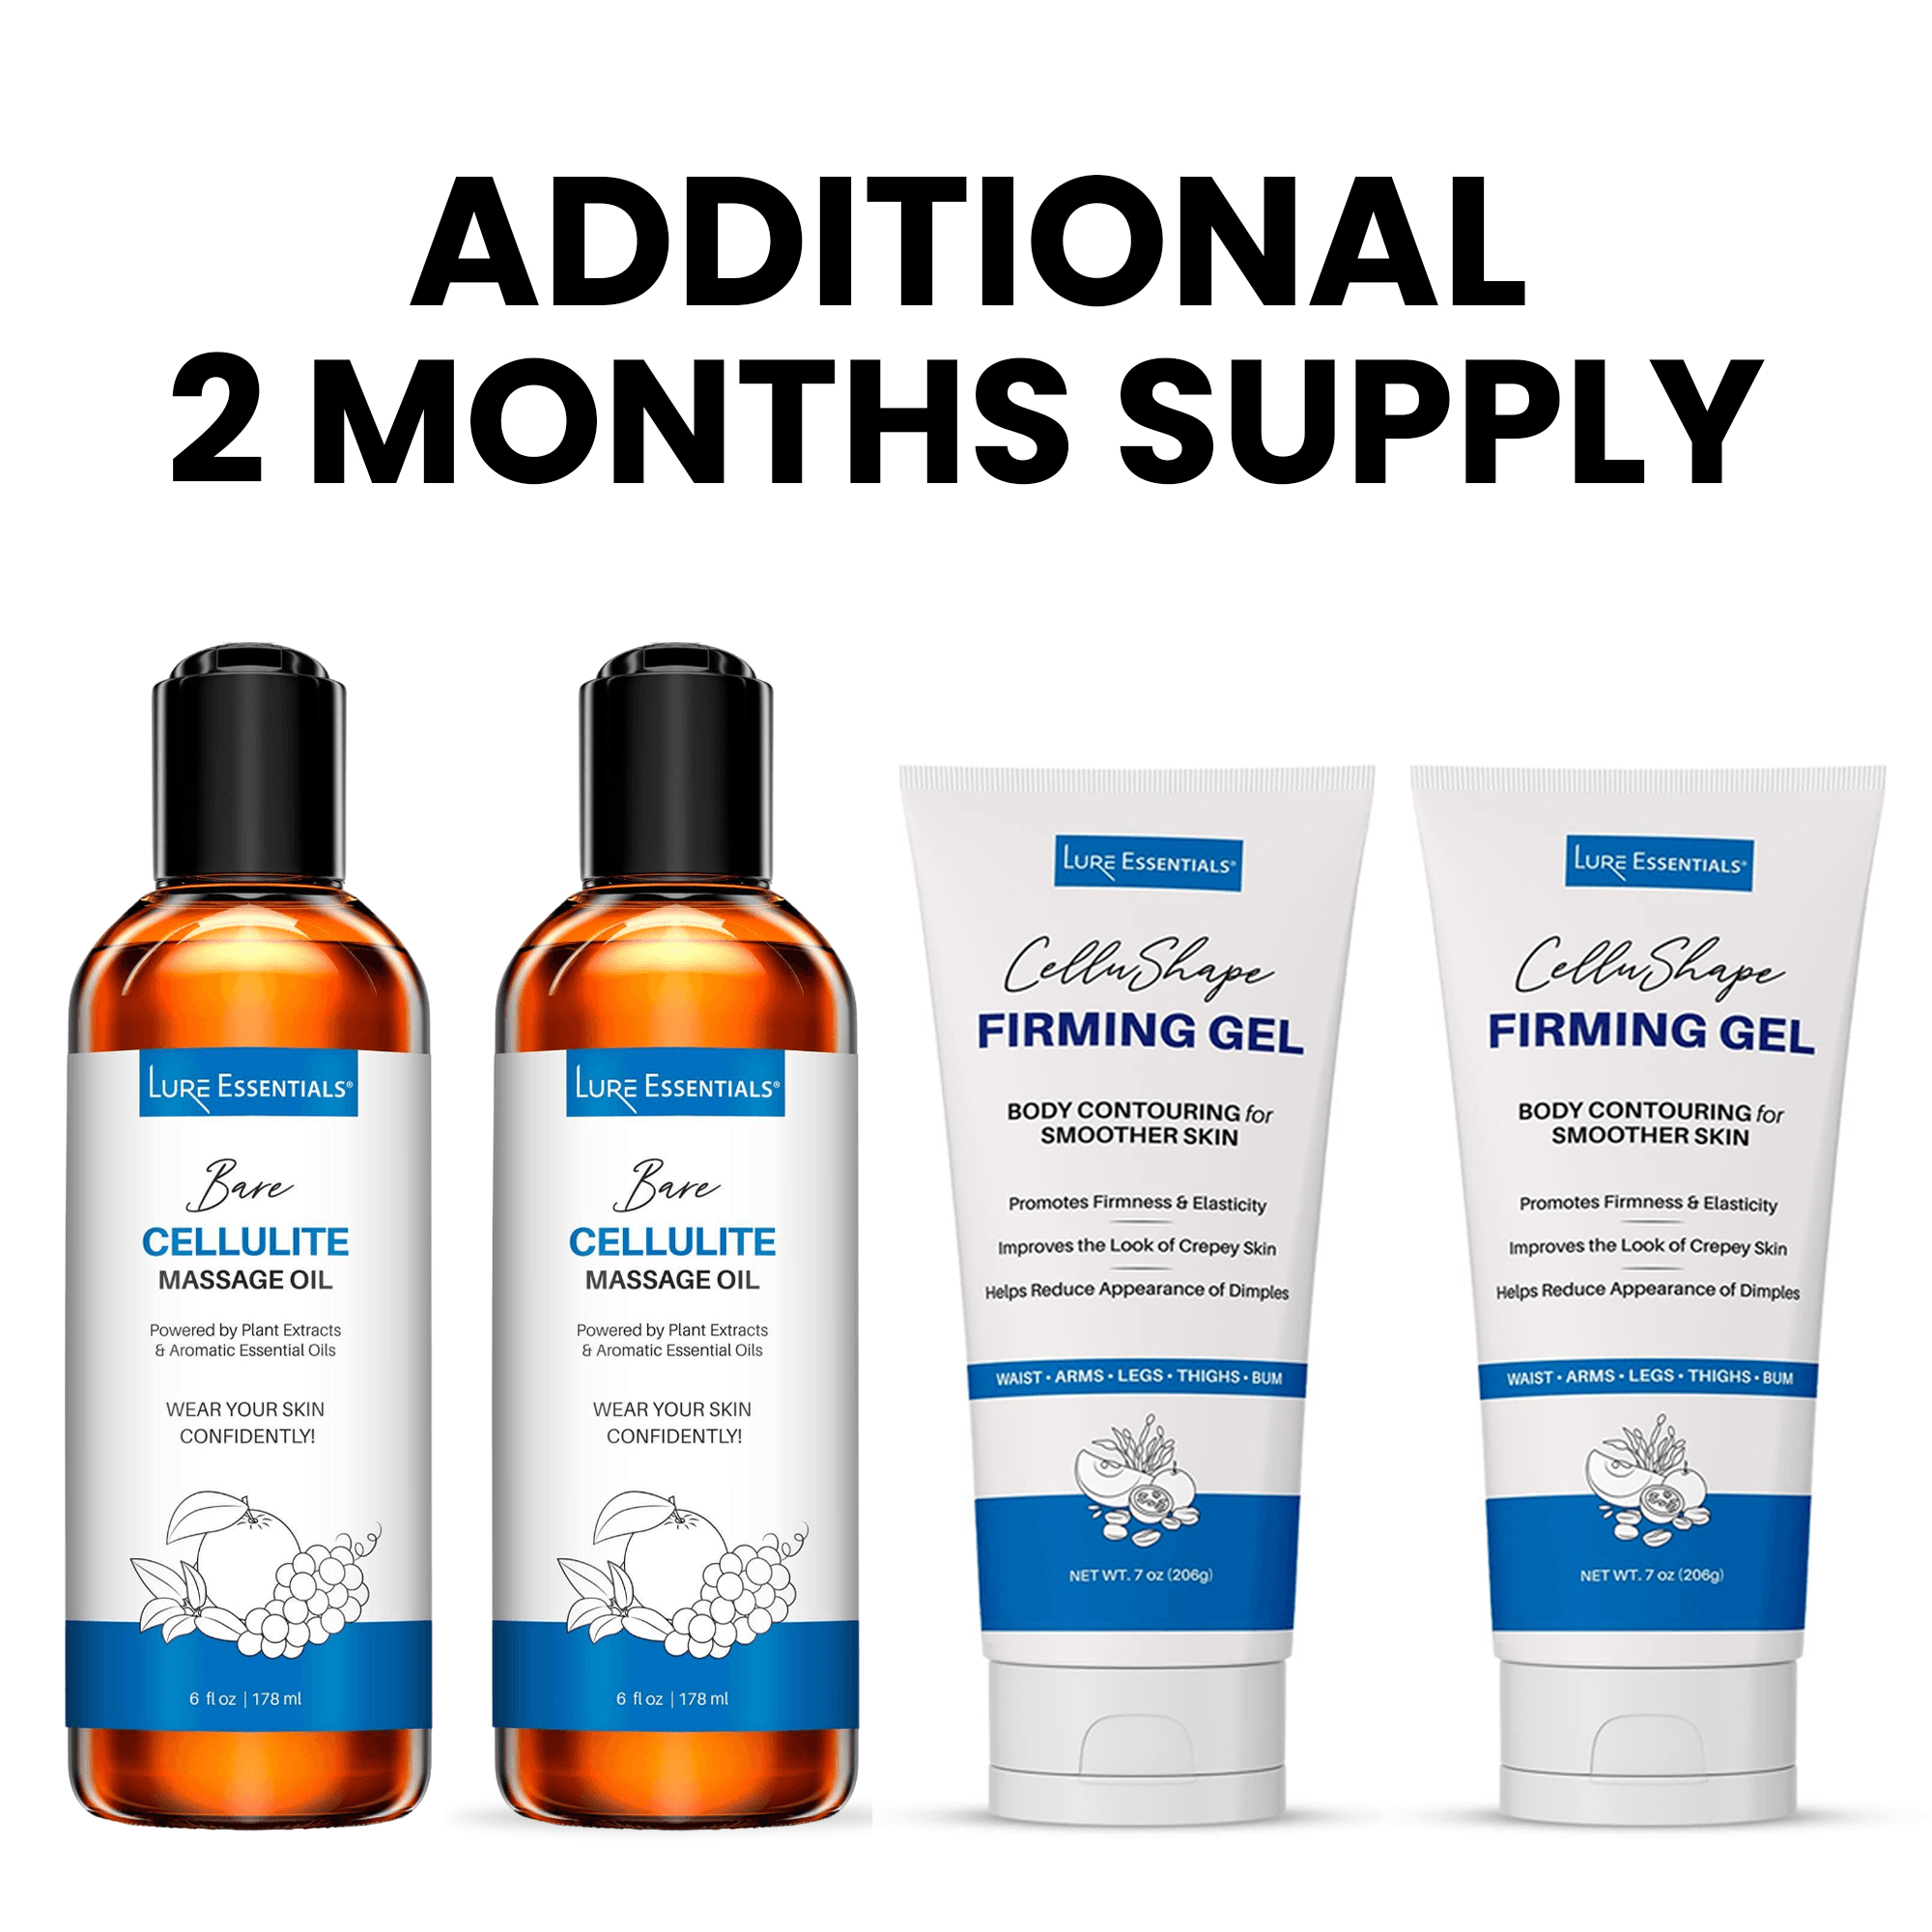 Additional 2 Months Supply